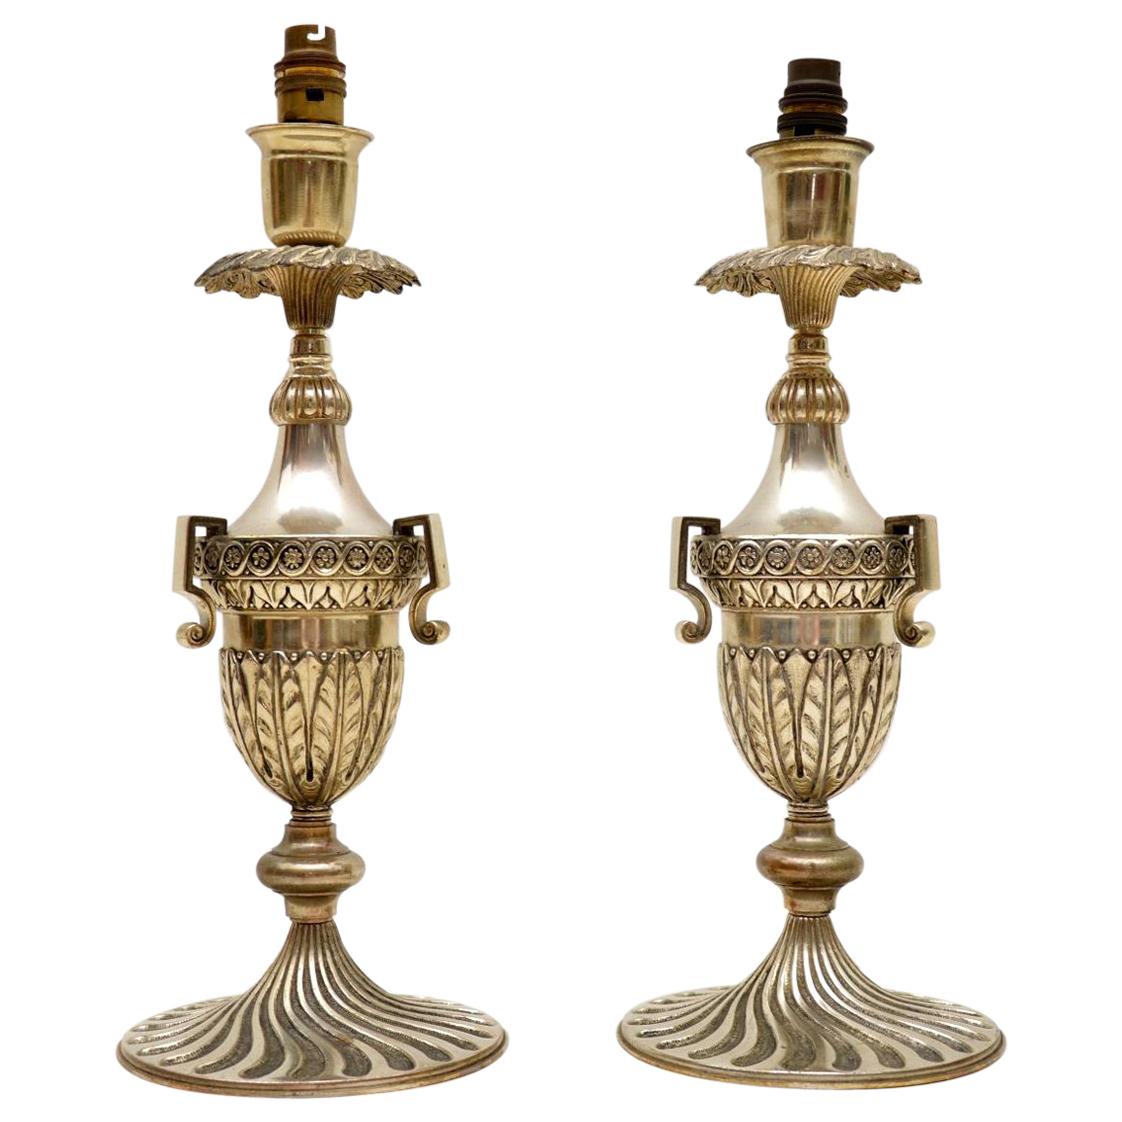 Pair of Antique Decorative Silvered Table Lamps